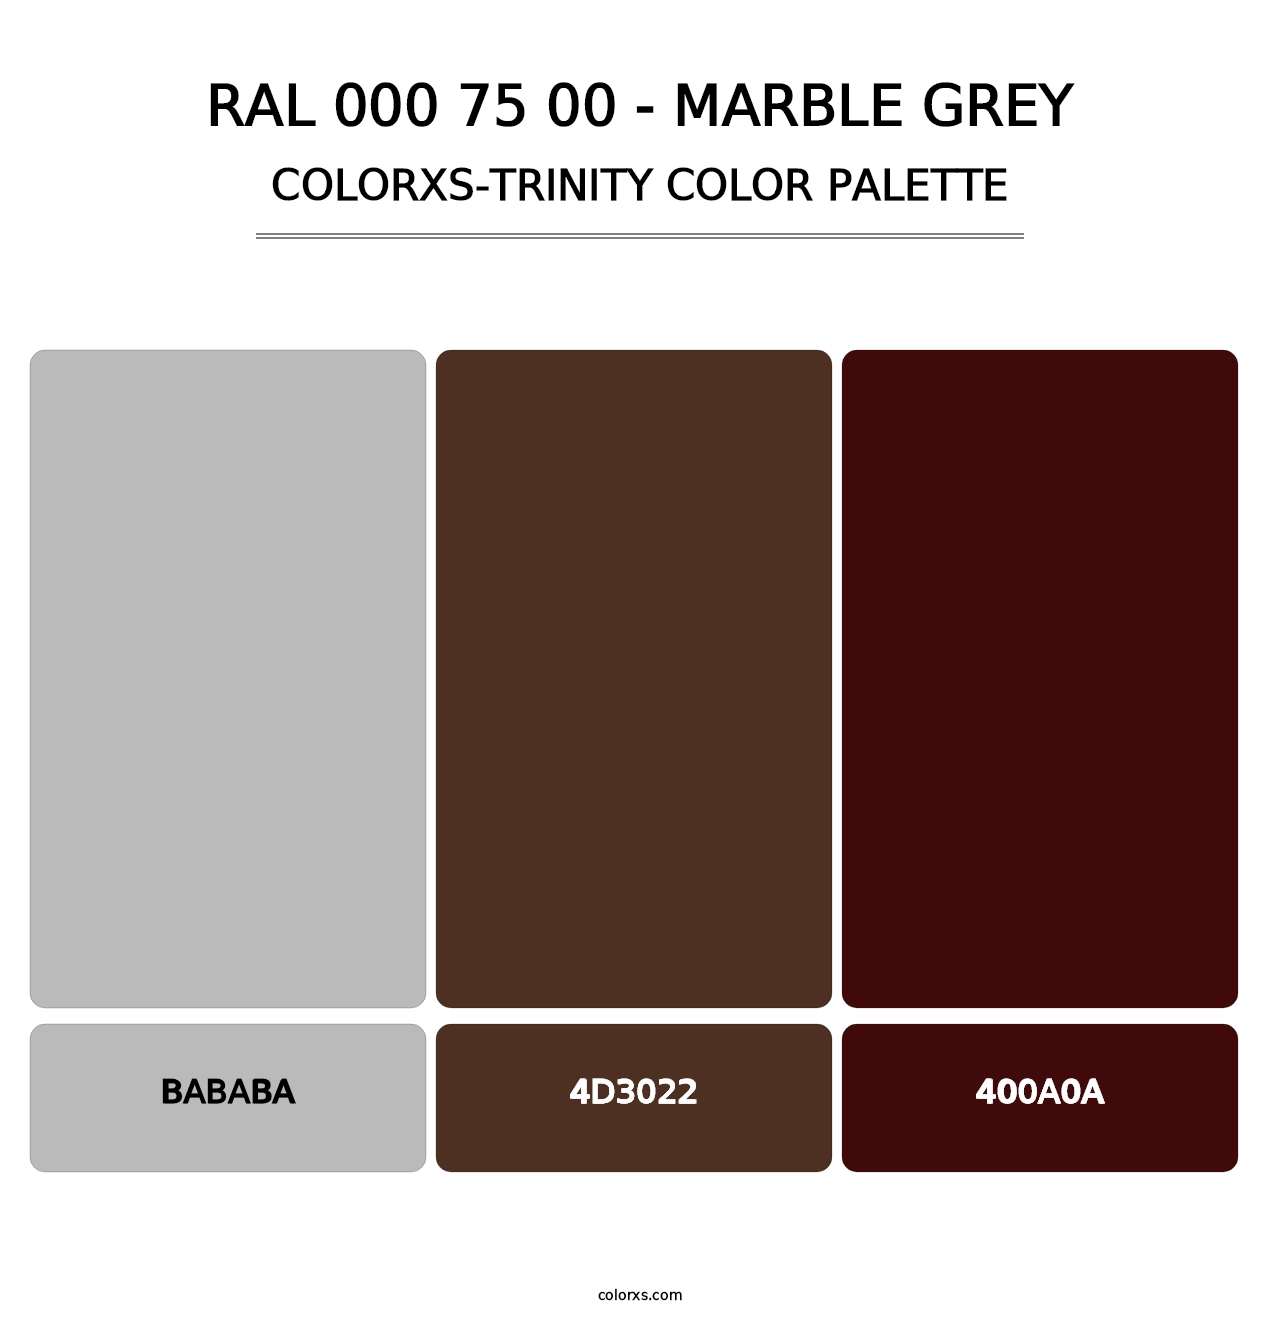 RAL 000 75 00 - Marble Grey - Colorxs Trinity Palette